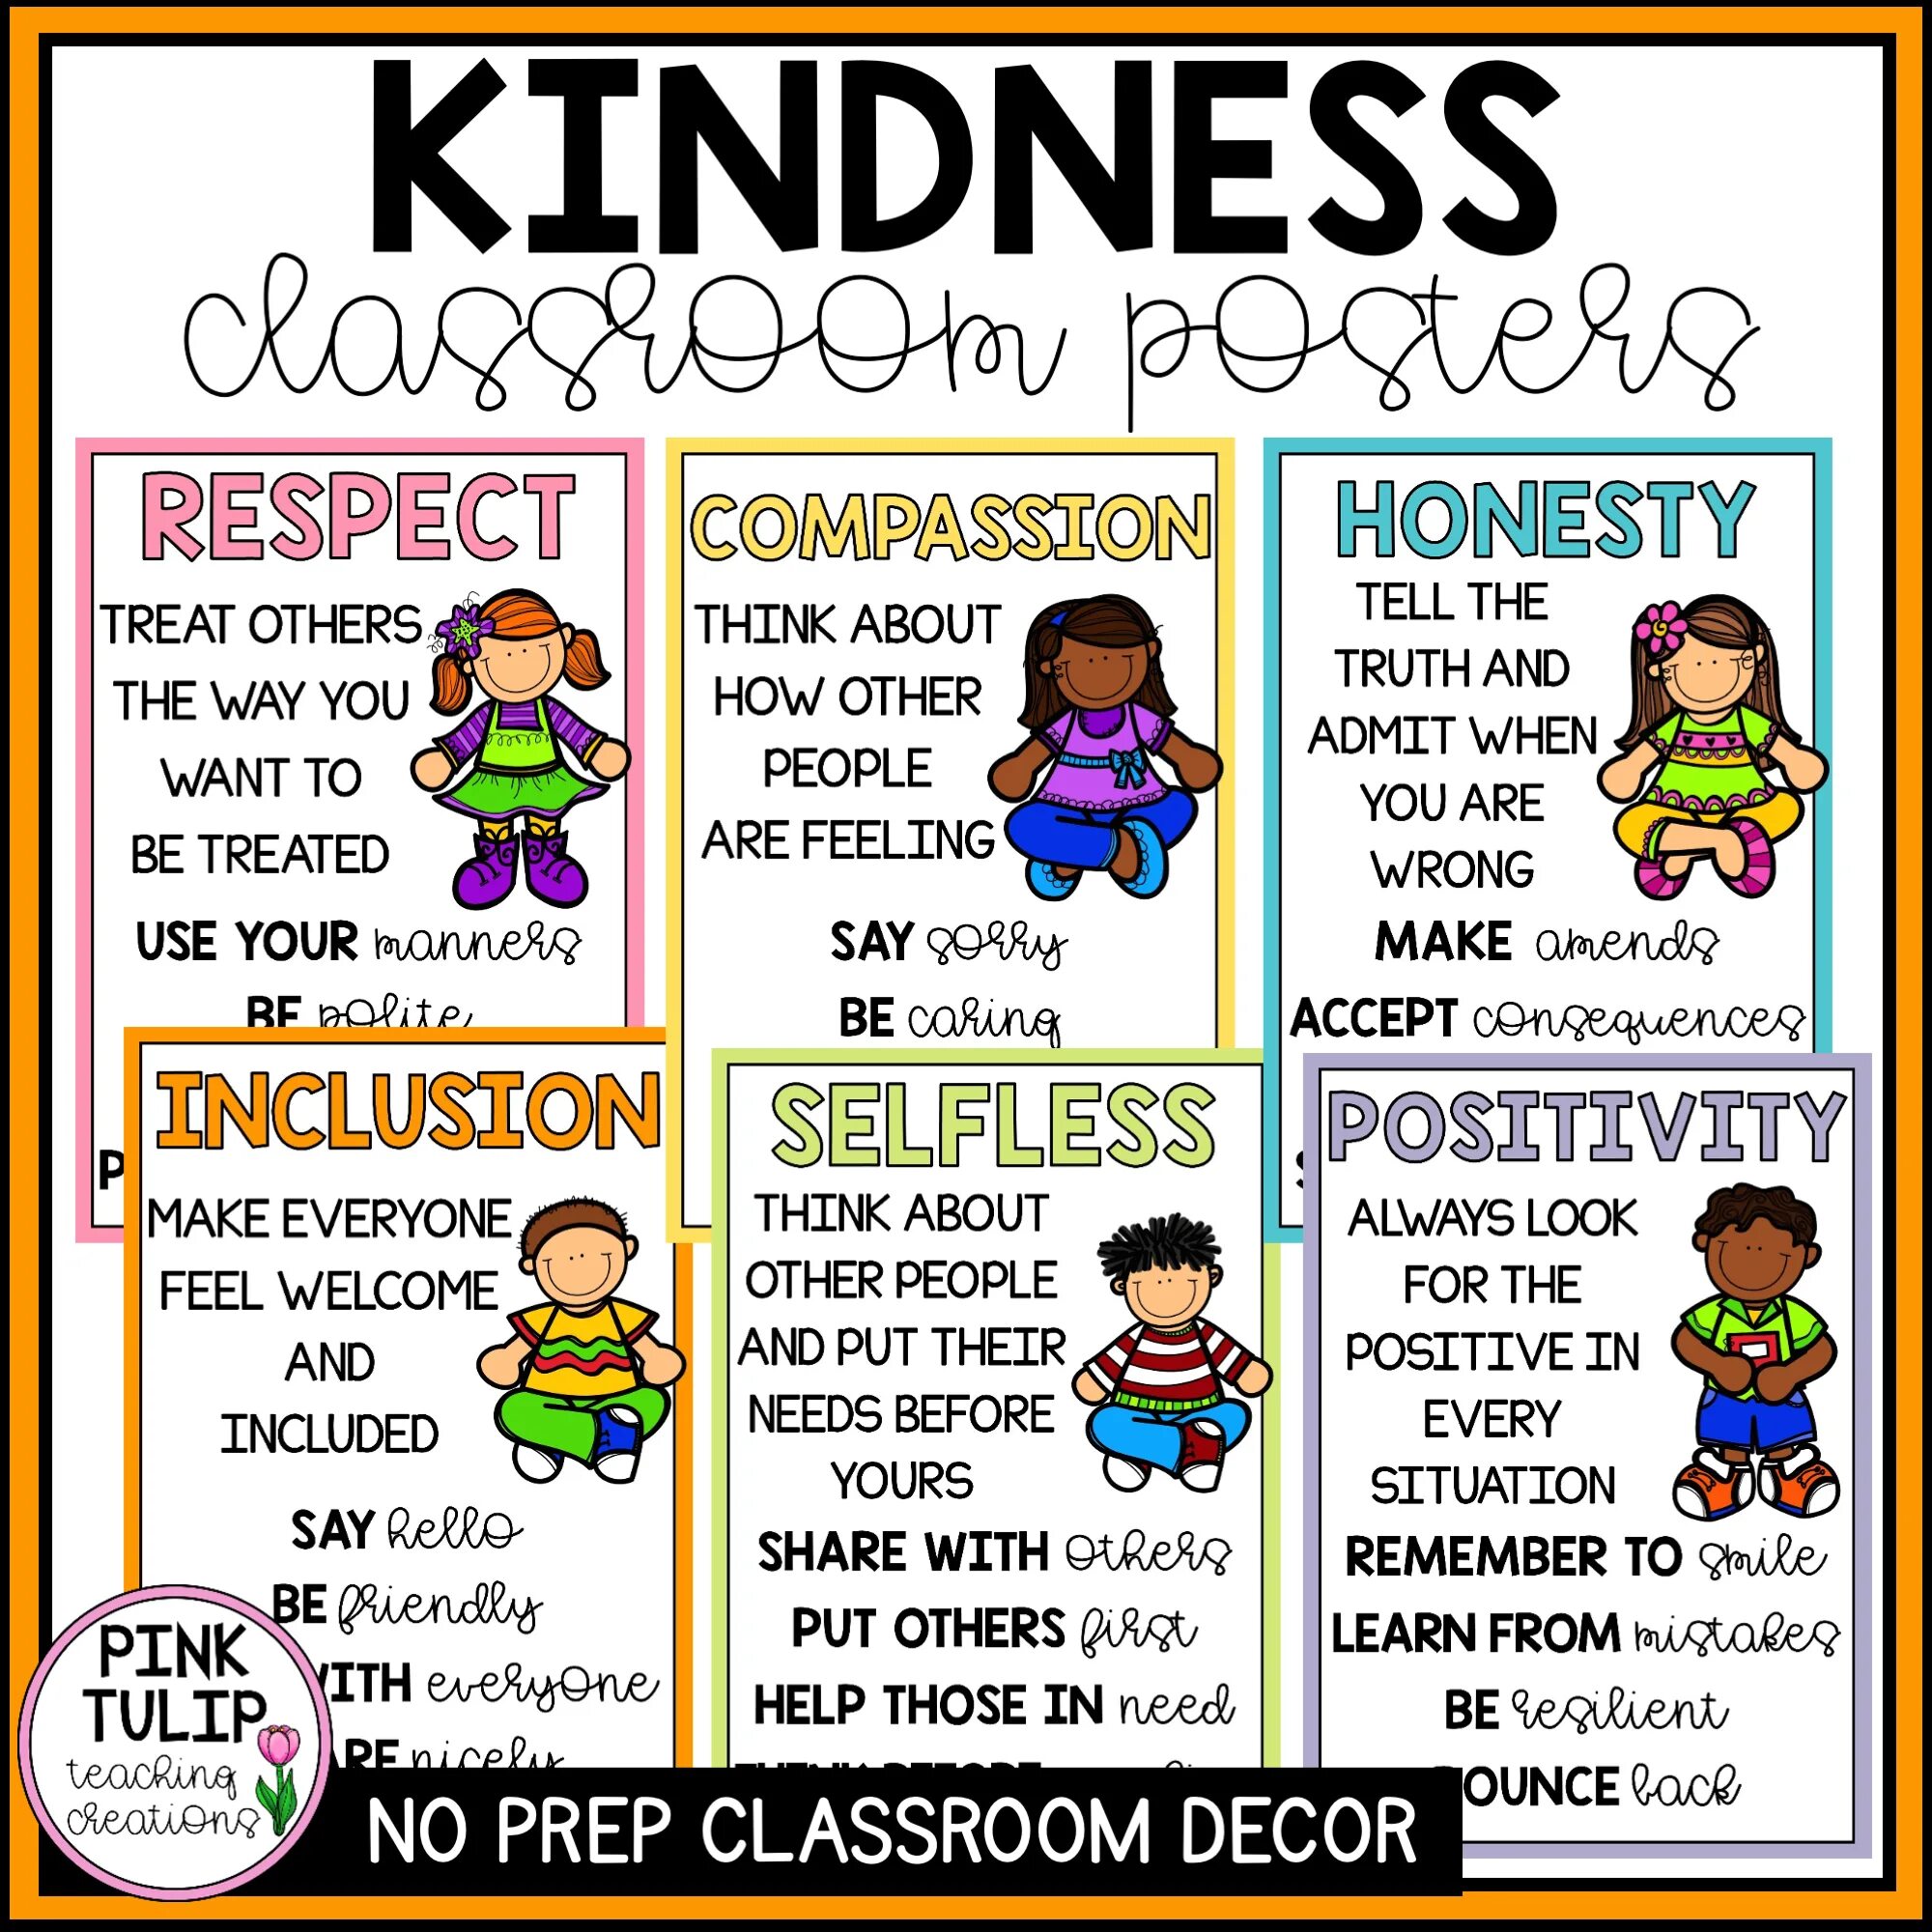 What is Kindness. Kindness Worksheets. Importance of Kindness презентация. Kindness - topic. We were told about showing kindness